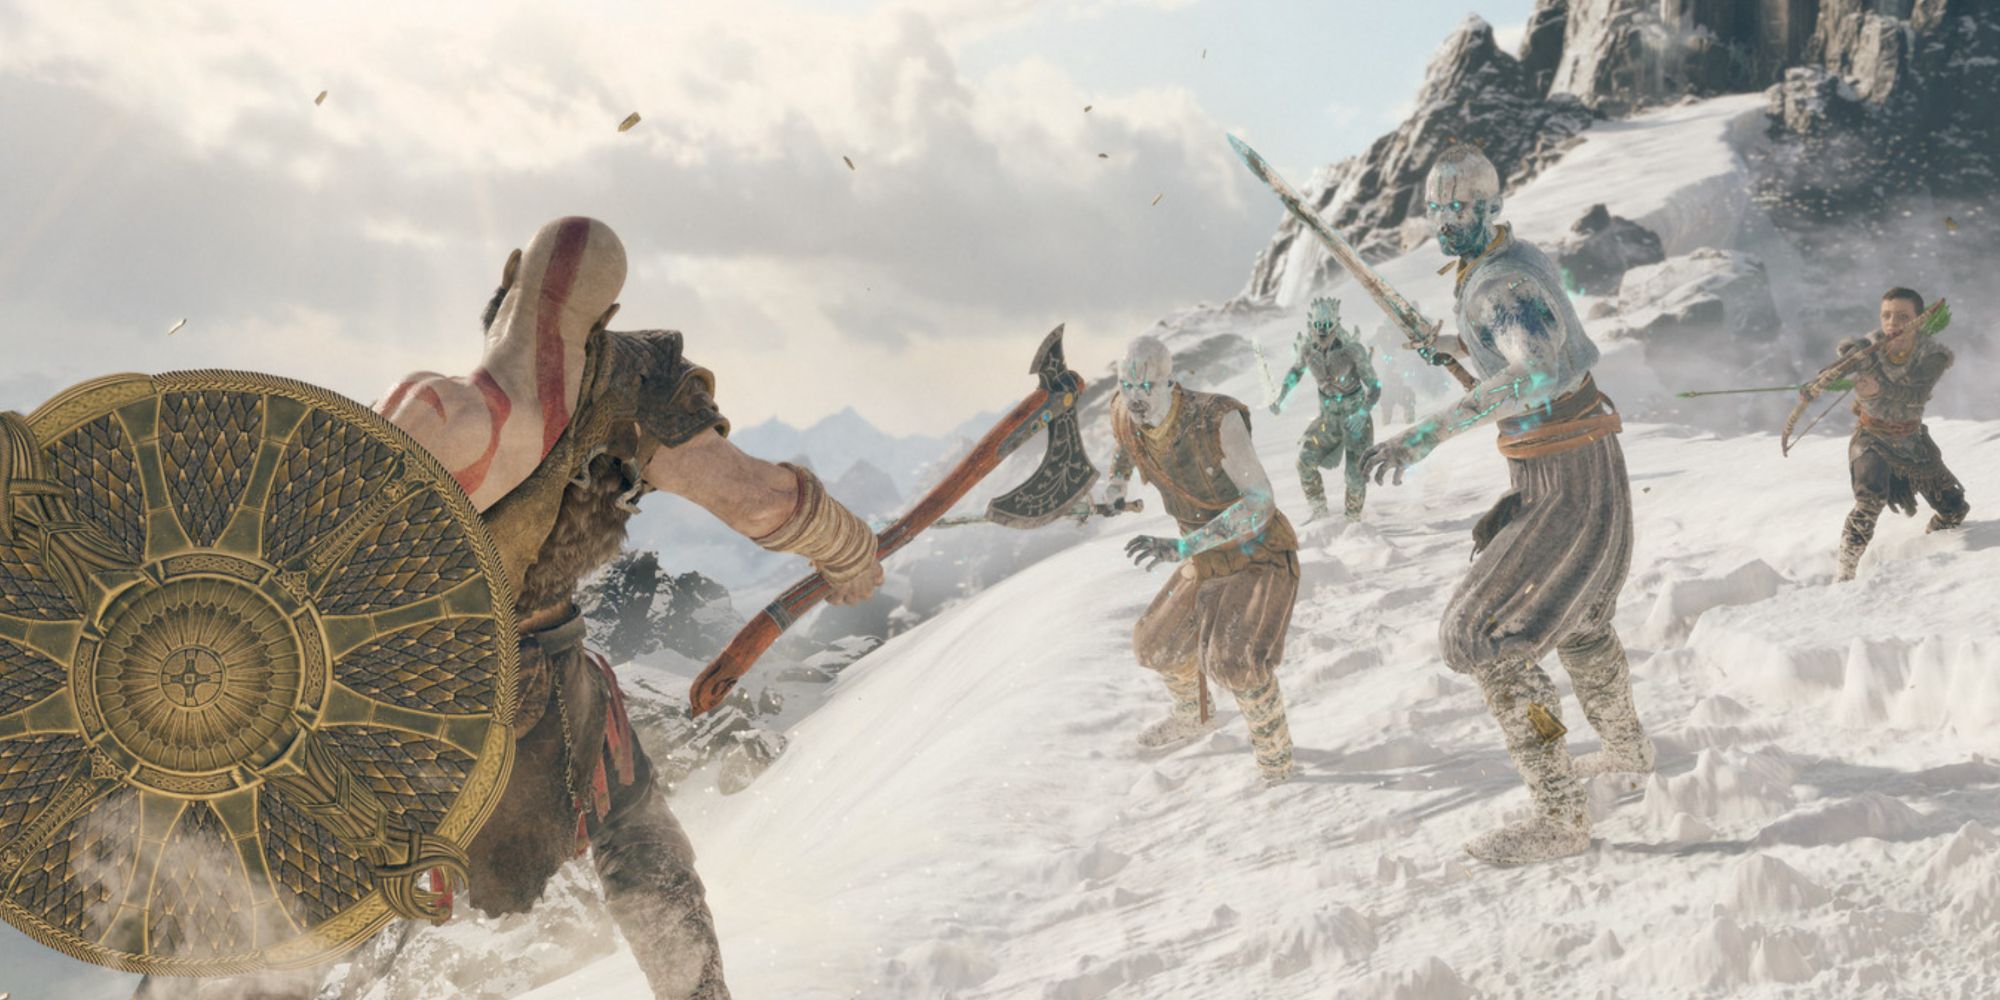 Kratos and Atreus fighting enemies on top of a snowy mountain in God of War